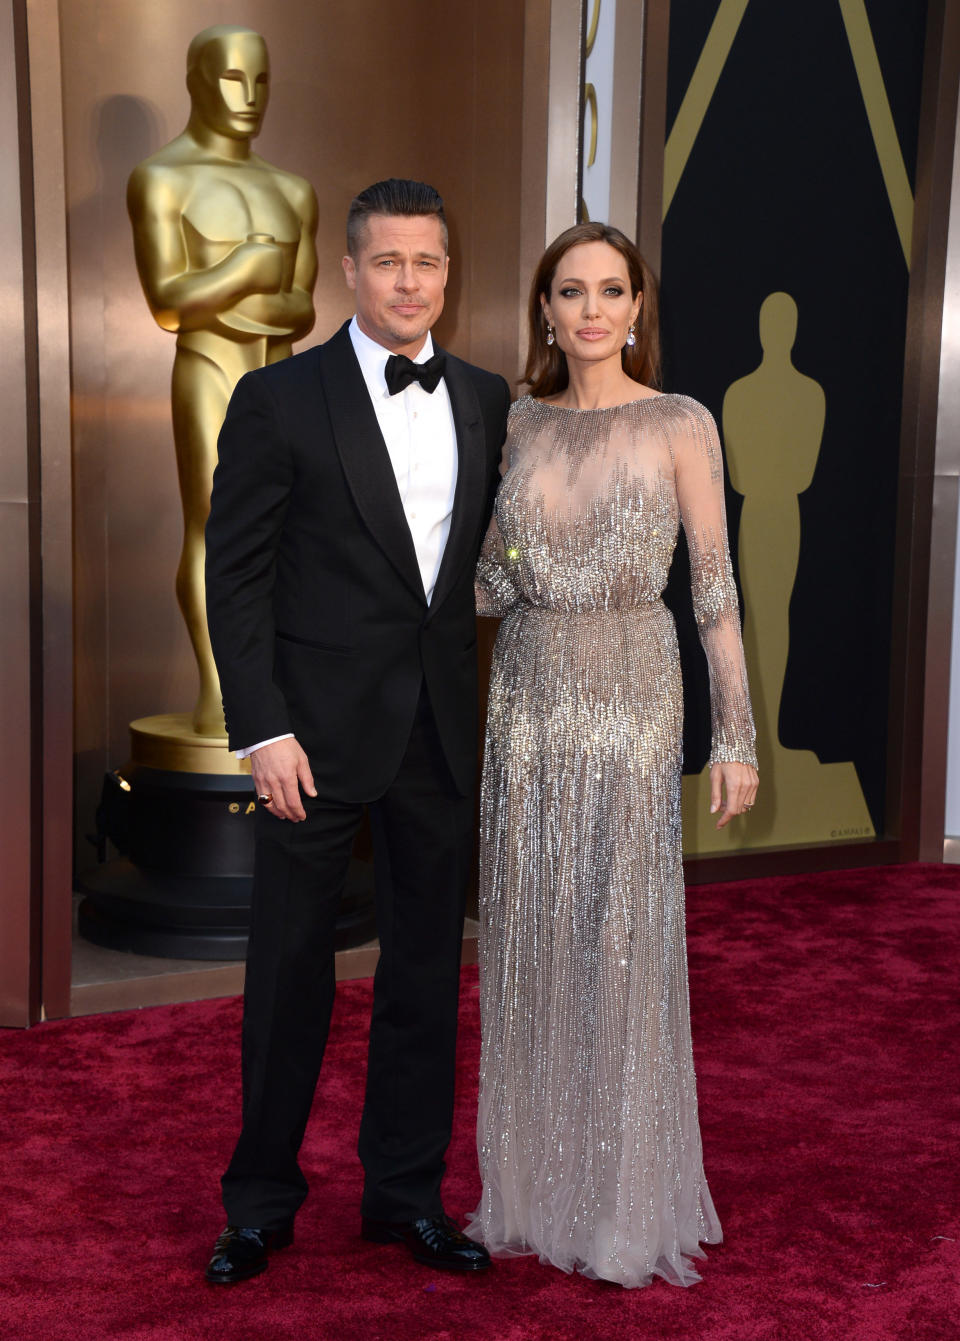 Angelina and Brad attend the Oscars in 2014, where Brad's film '12 Years A Slave' scoops a number of Awards, including Best Picture.